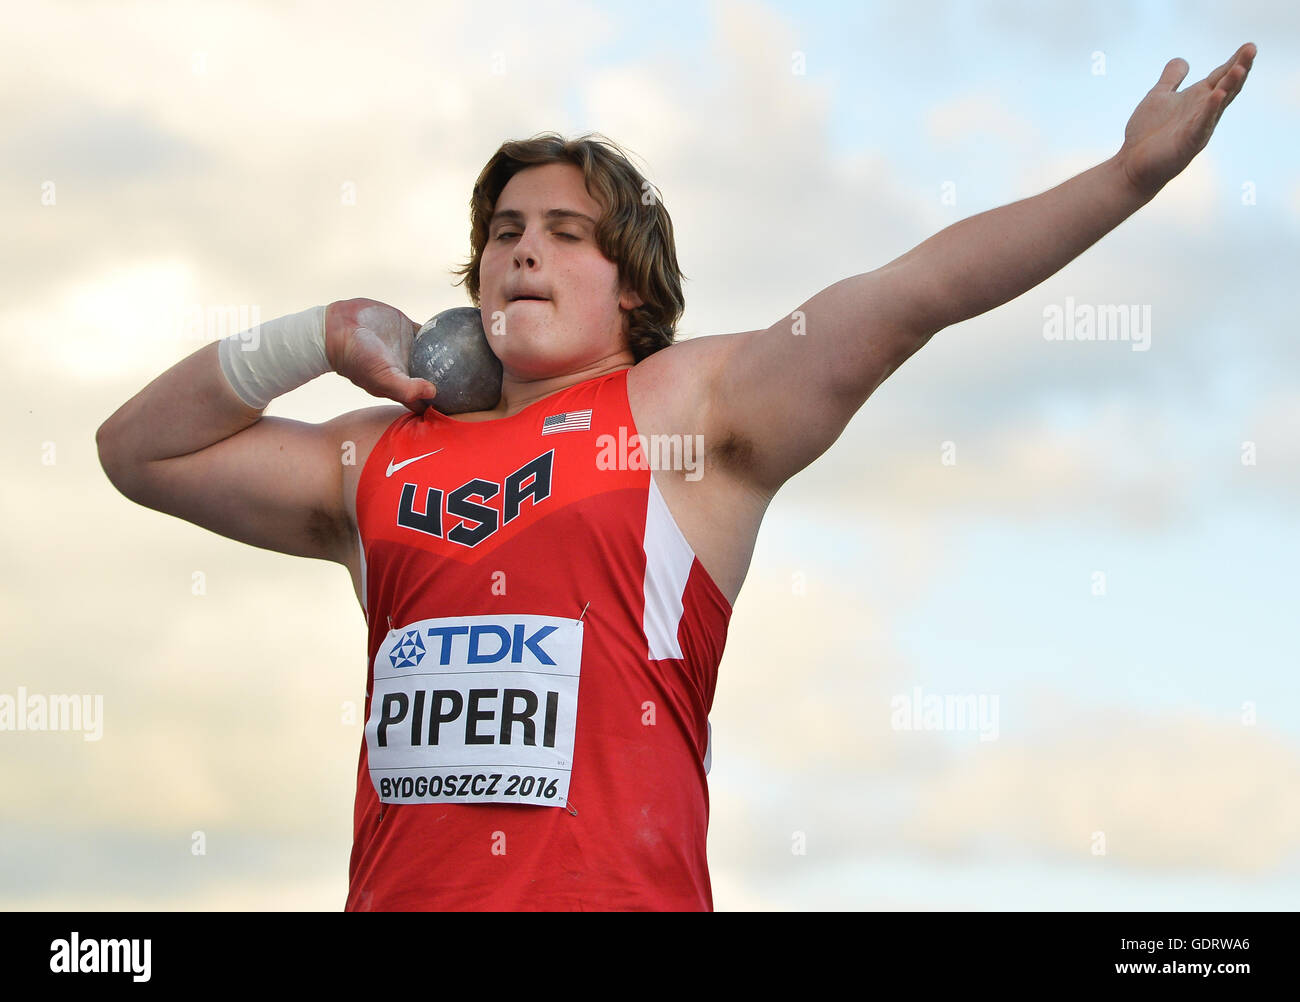 Bydgoszcz, Poland. 19th July, 2016. Adrian Piperi III of the USA in the final of the mens shot put during the afternoon session on day 1 of the IAAF World Junior Championships at Zawisza Stadium on July 19, 2016 in Bydgoszcz, Poland. Credit:  Roger Sedres/Alamy Live News Stock Photo